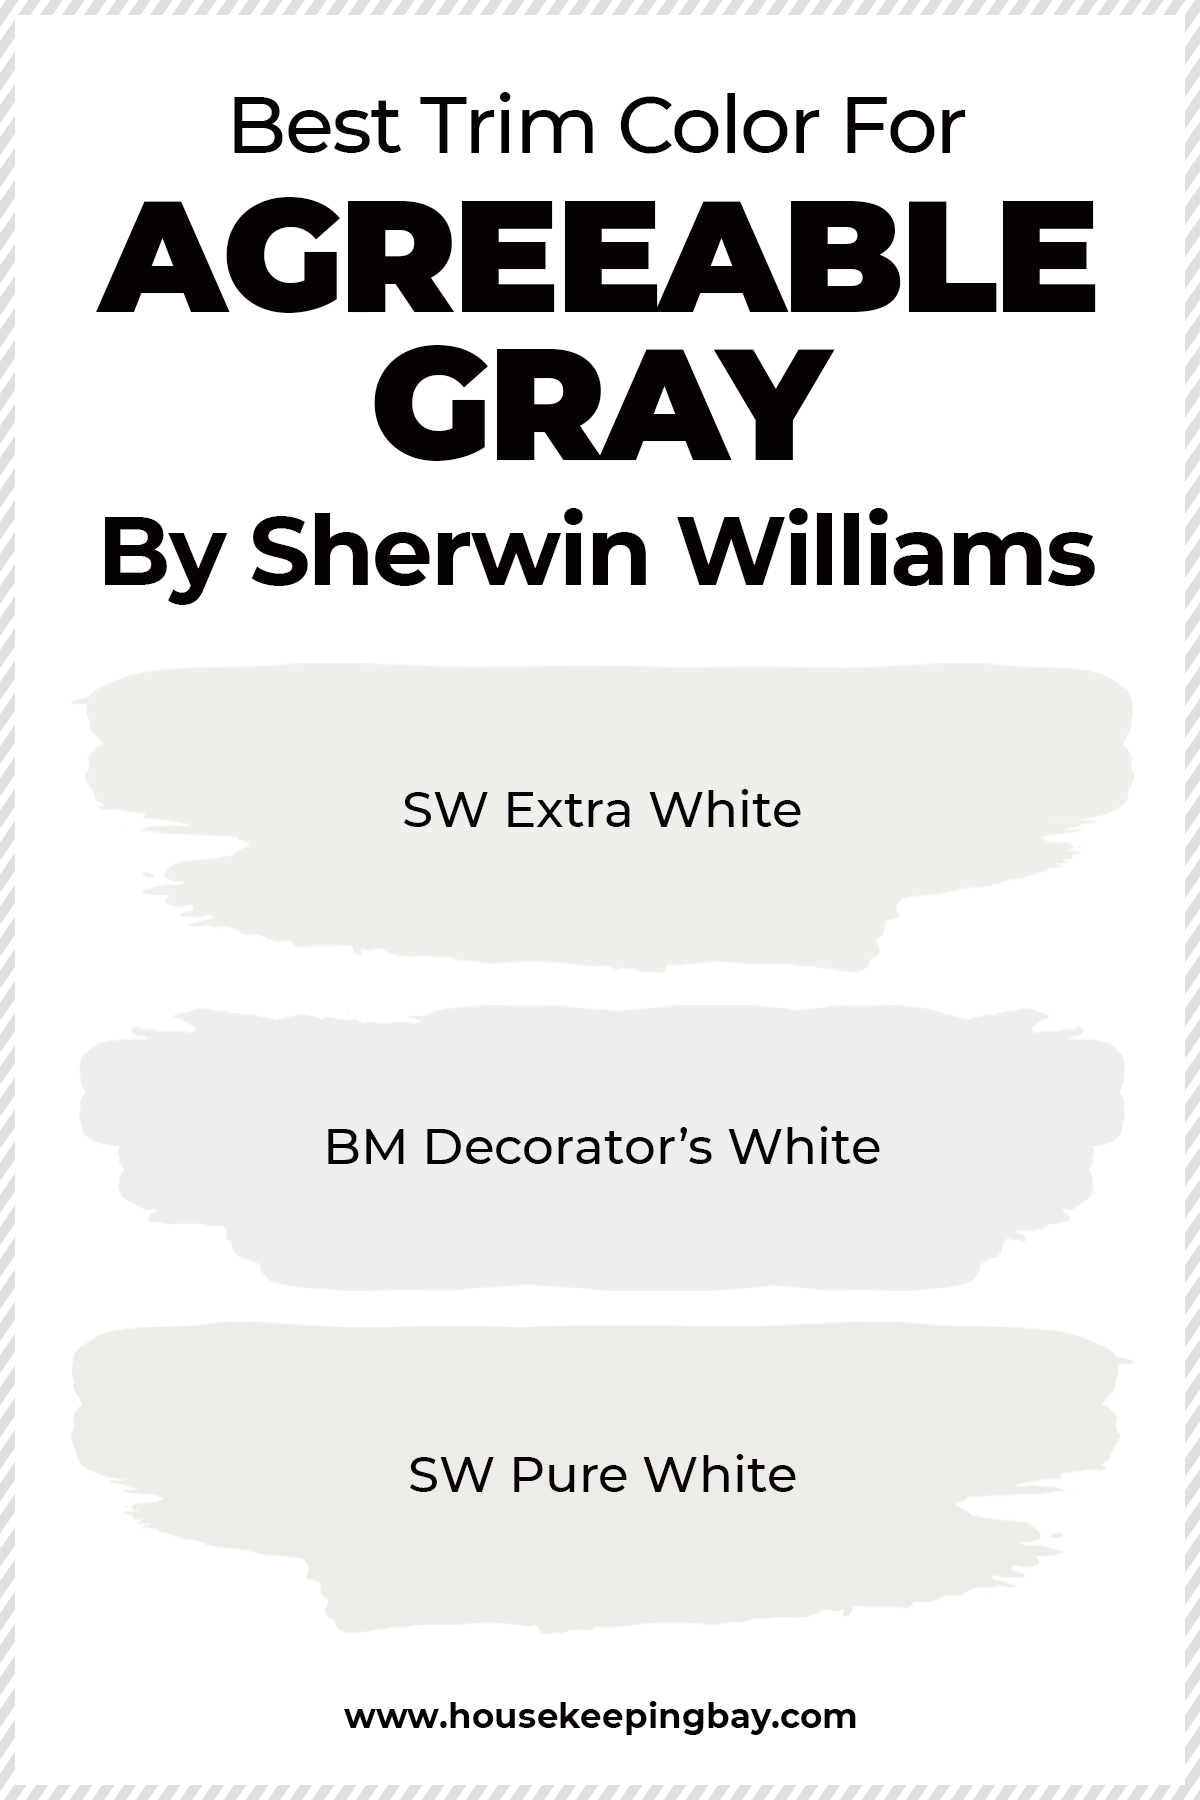 Best Trim Color For Agreeable Gray